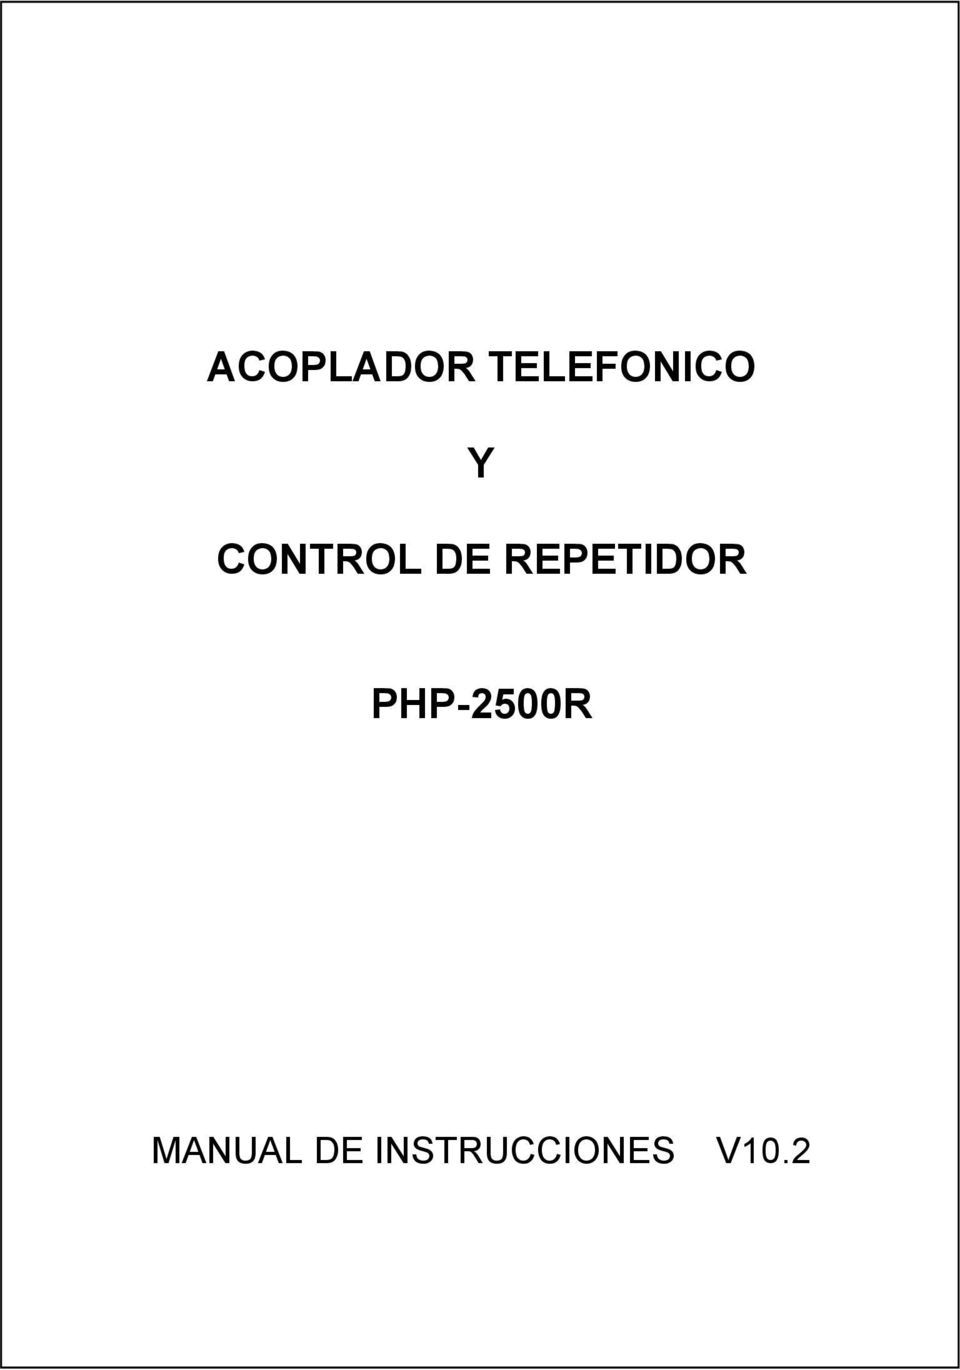 REPETIDOR PHP-2500R